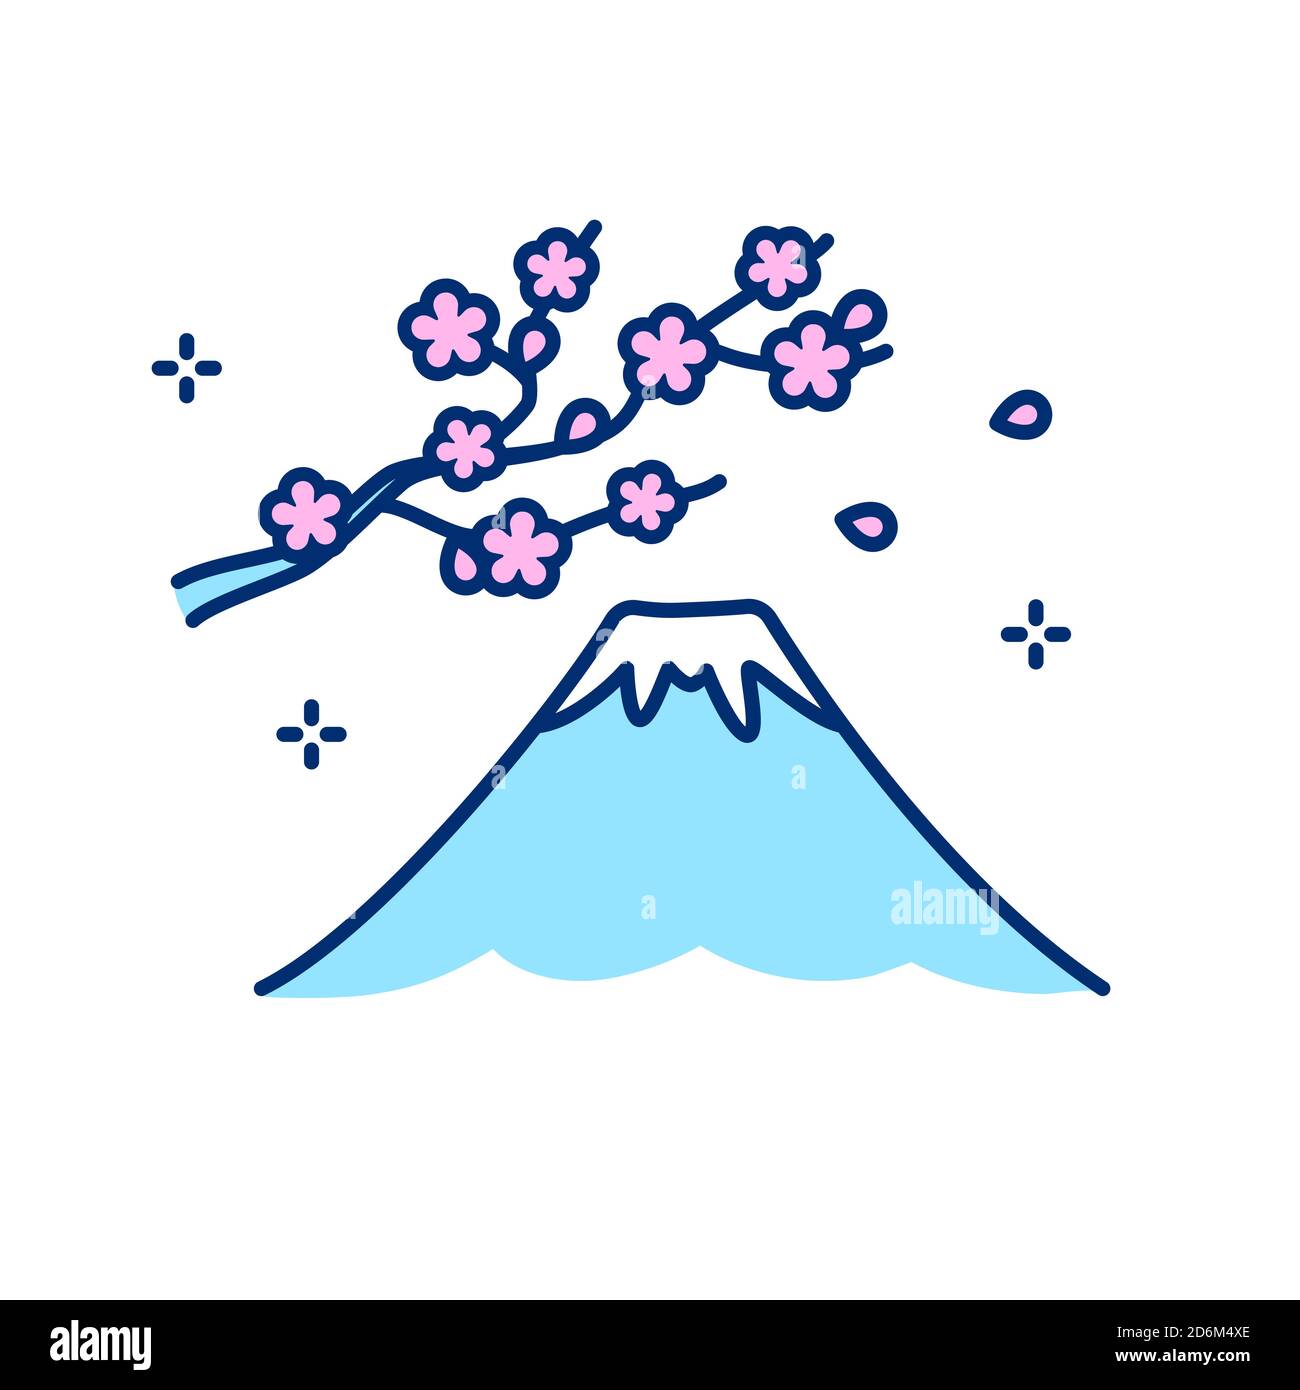 iPad Drawing Tutorial Create a beautifully rendered drawing of Mount Fuji   by Nicole M Cleary  clearydrawn  Medium